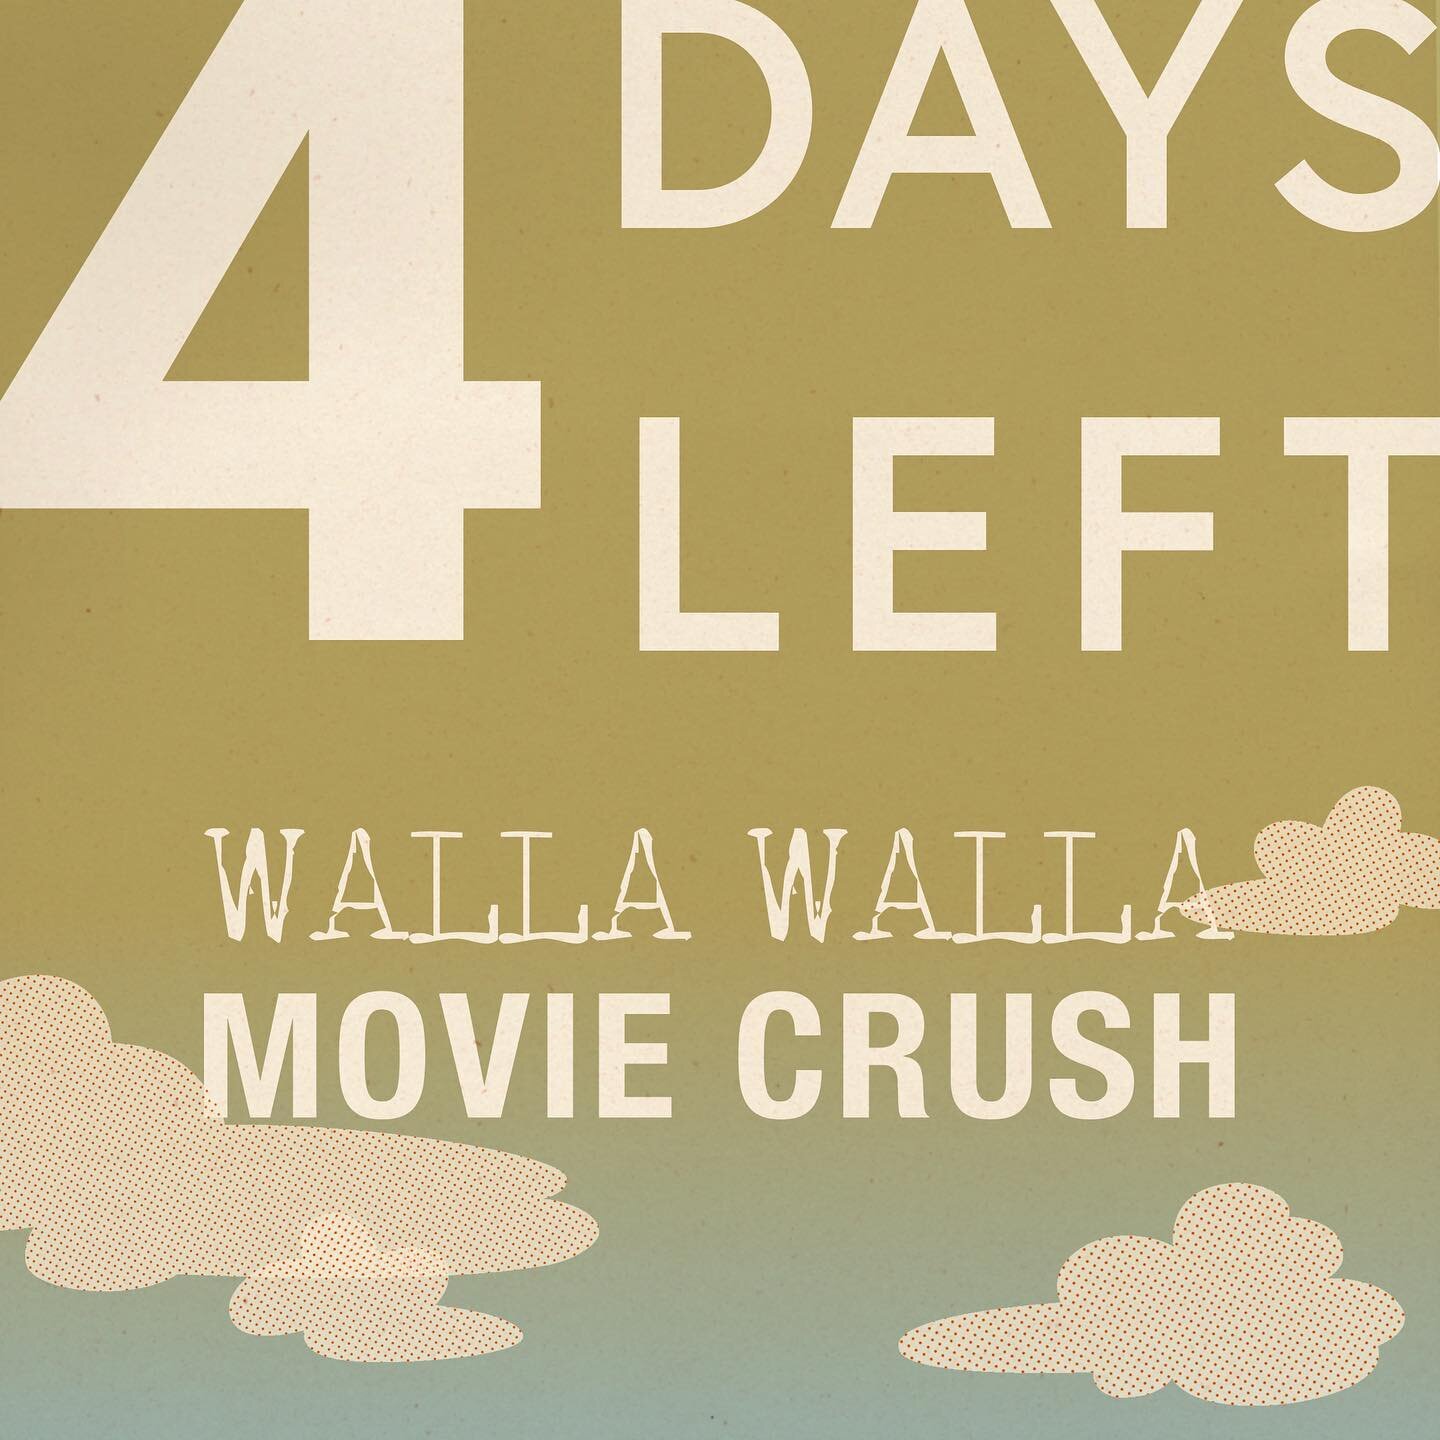 4 more days! 4 words in Walla Walla Movie Crush! Coincidence? Yeah, actually. We know how linear time and the English language work. 

#CrushFam4eva #CrushingIt #wallawallahollaholla #wallawalla #shortfilm #filmfestival #narrativeshort #animatedshort